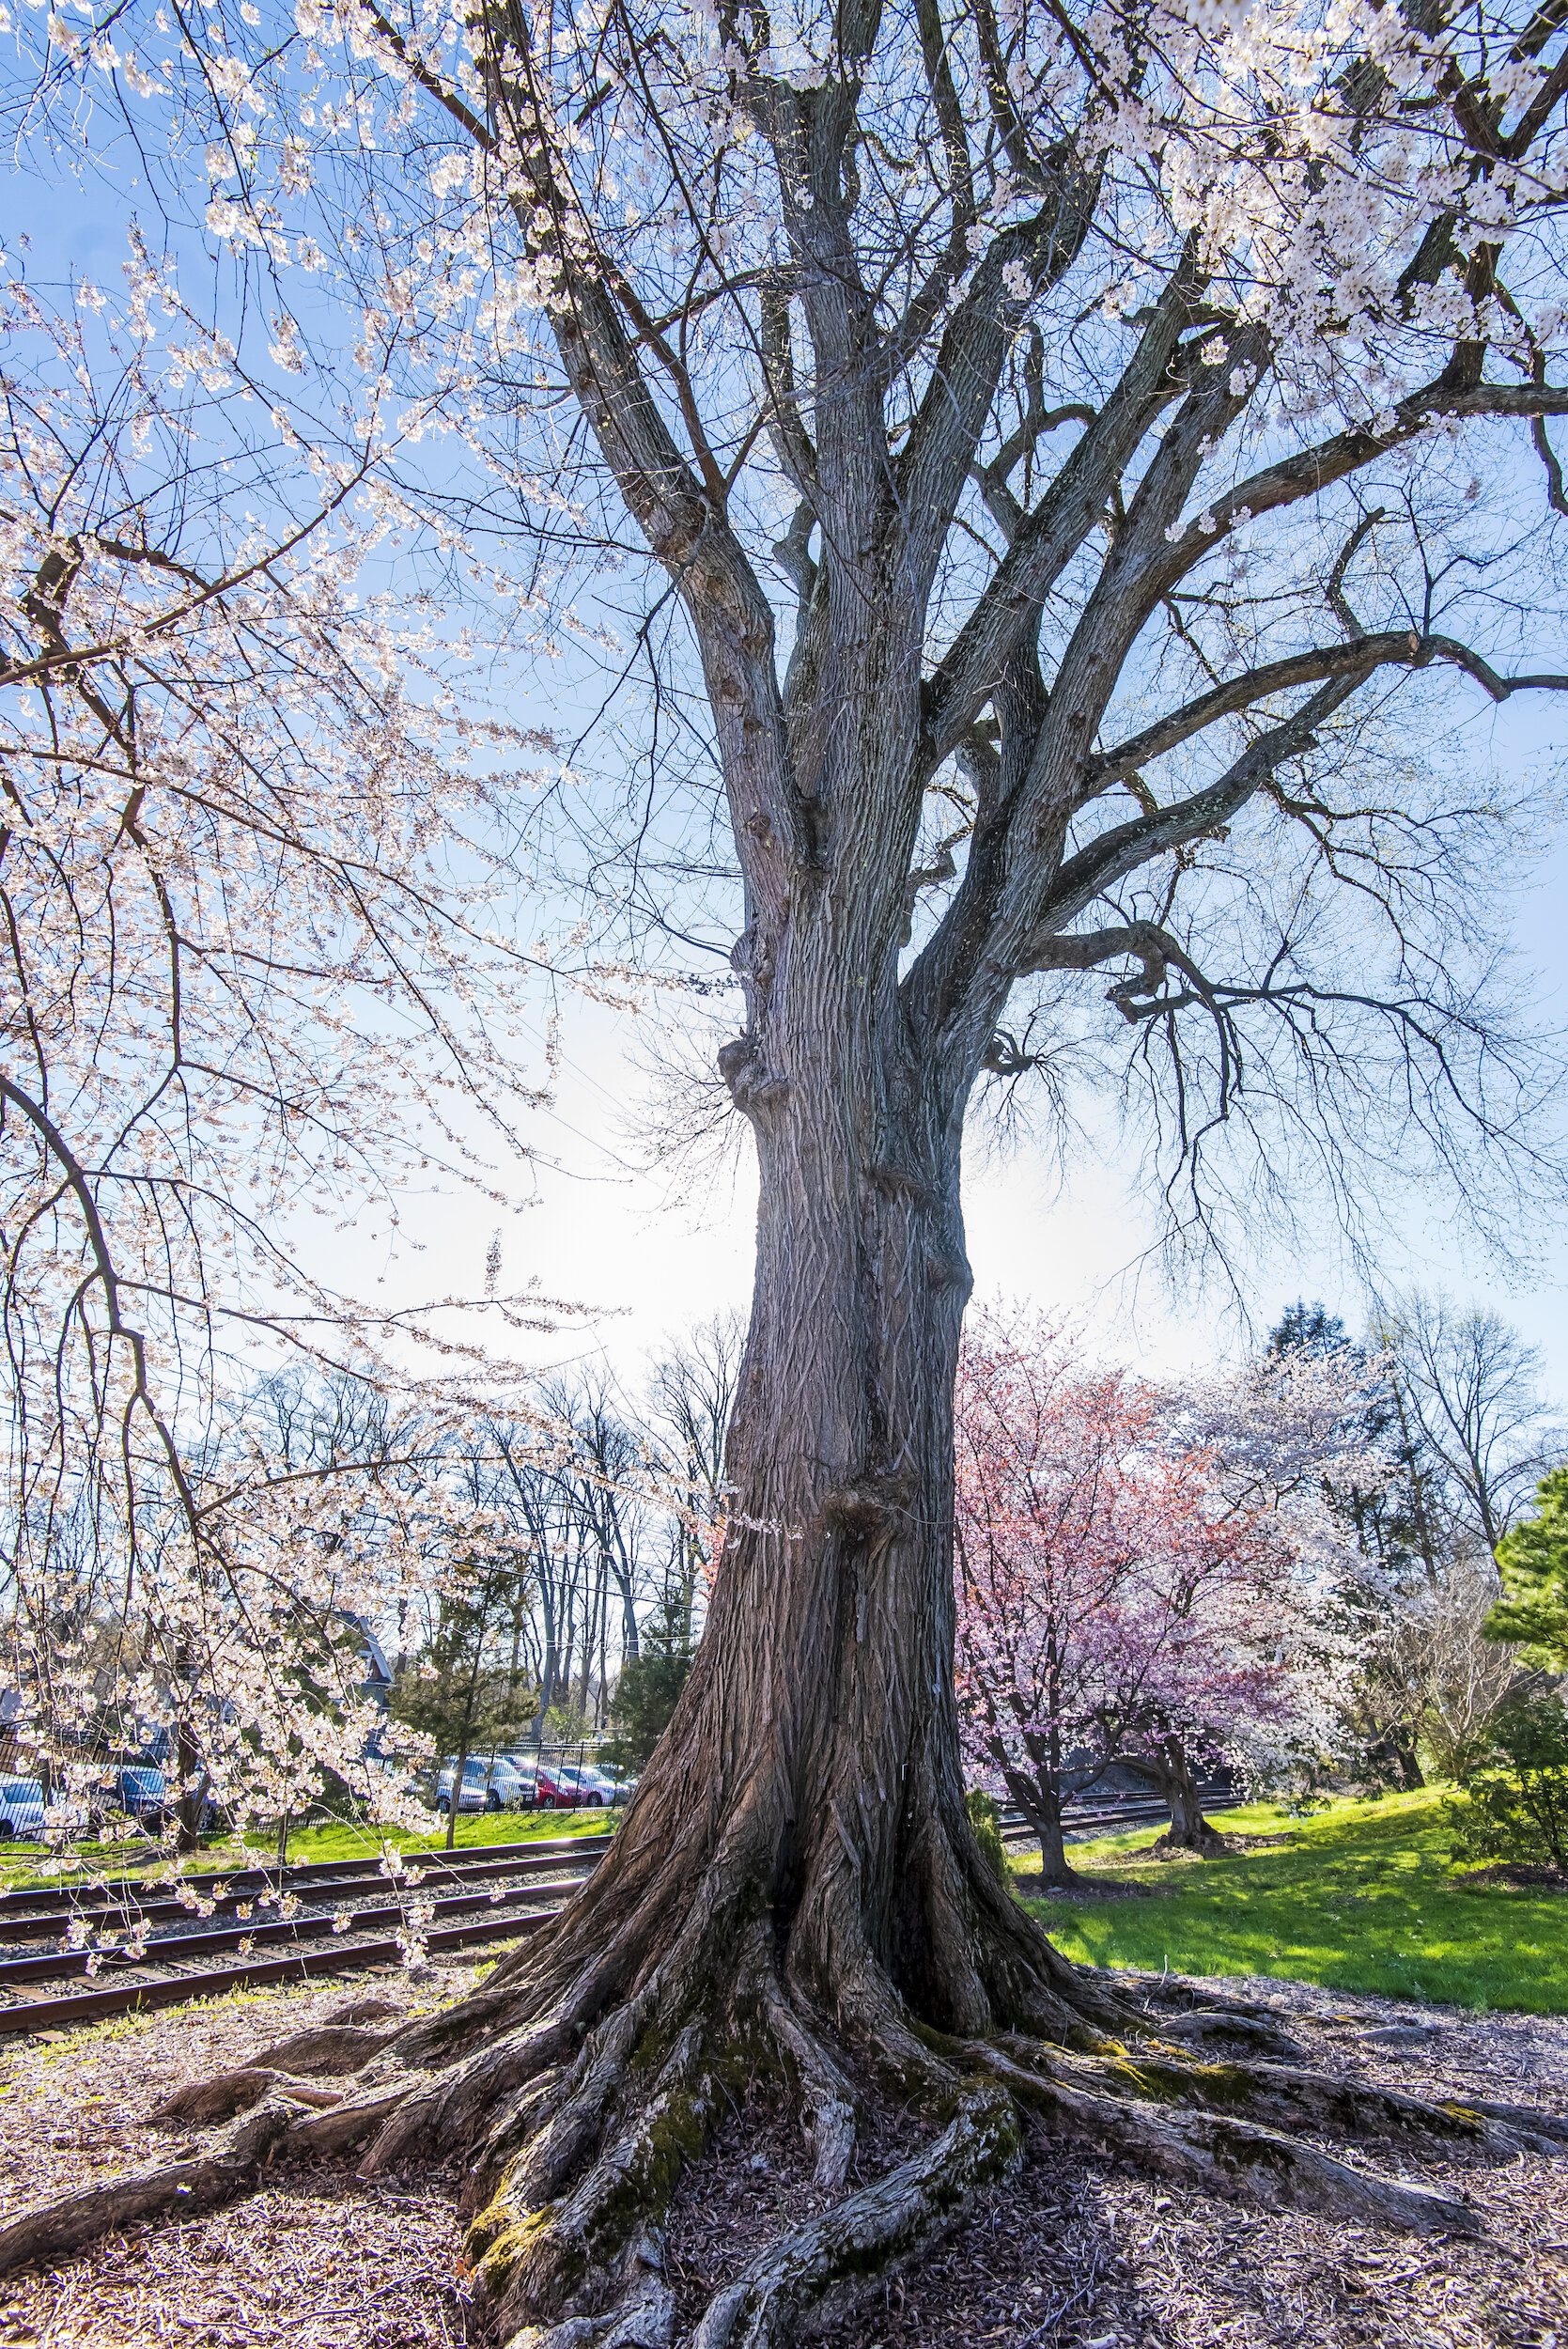 A champion American elm stands tall at Scott Arboretum, Swarthmore.